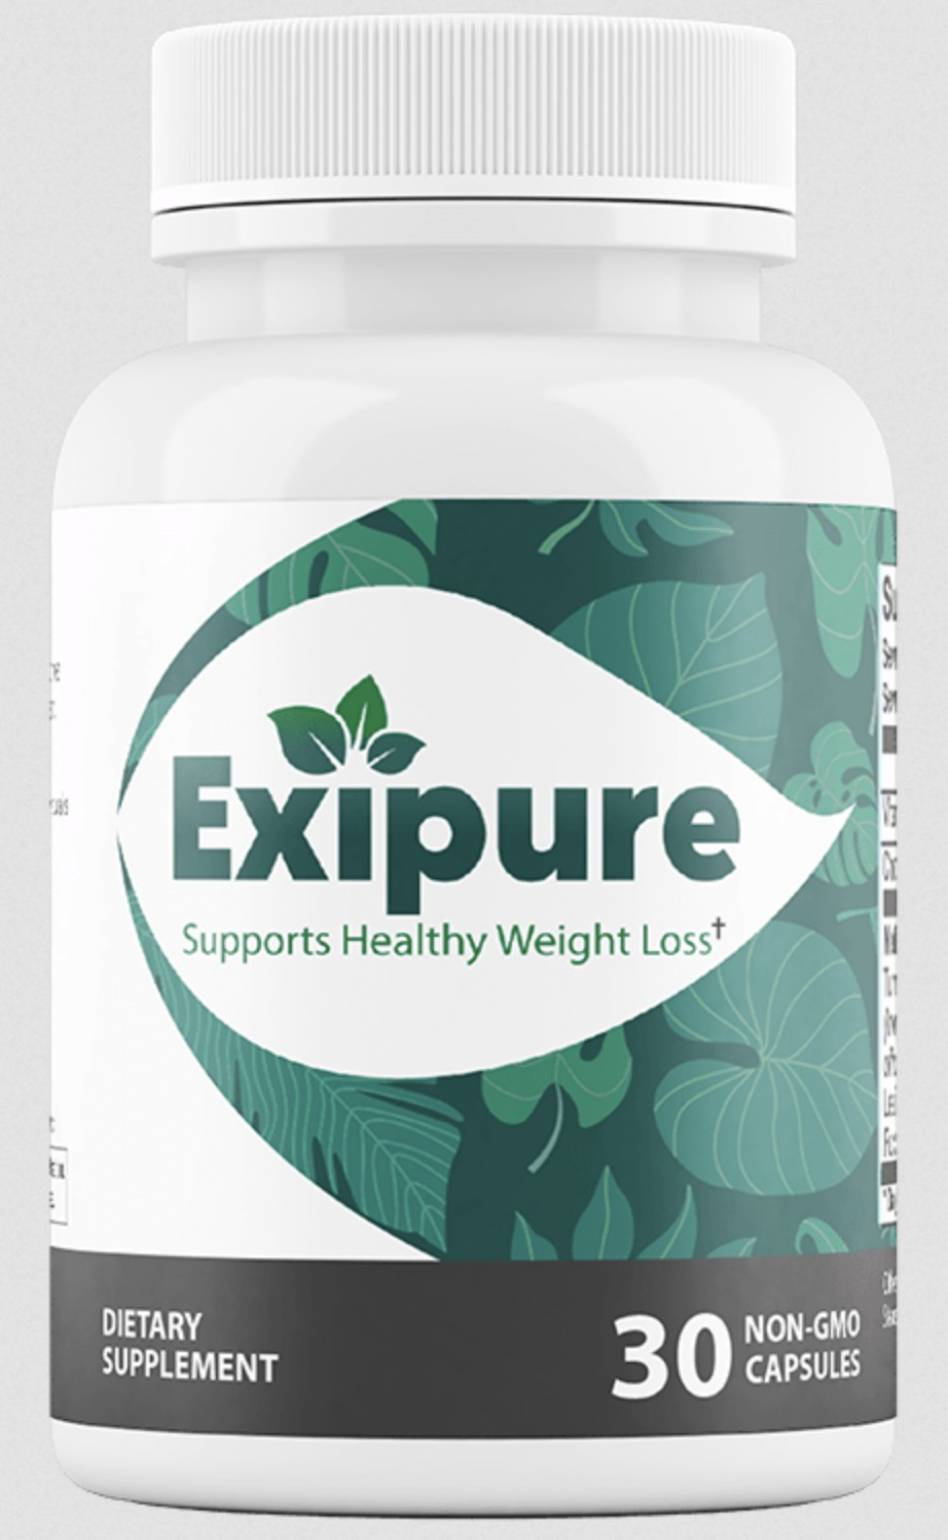 Does Exipure Work For Women